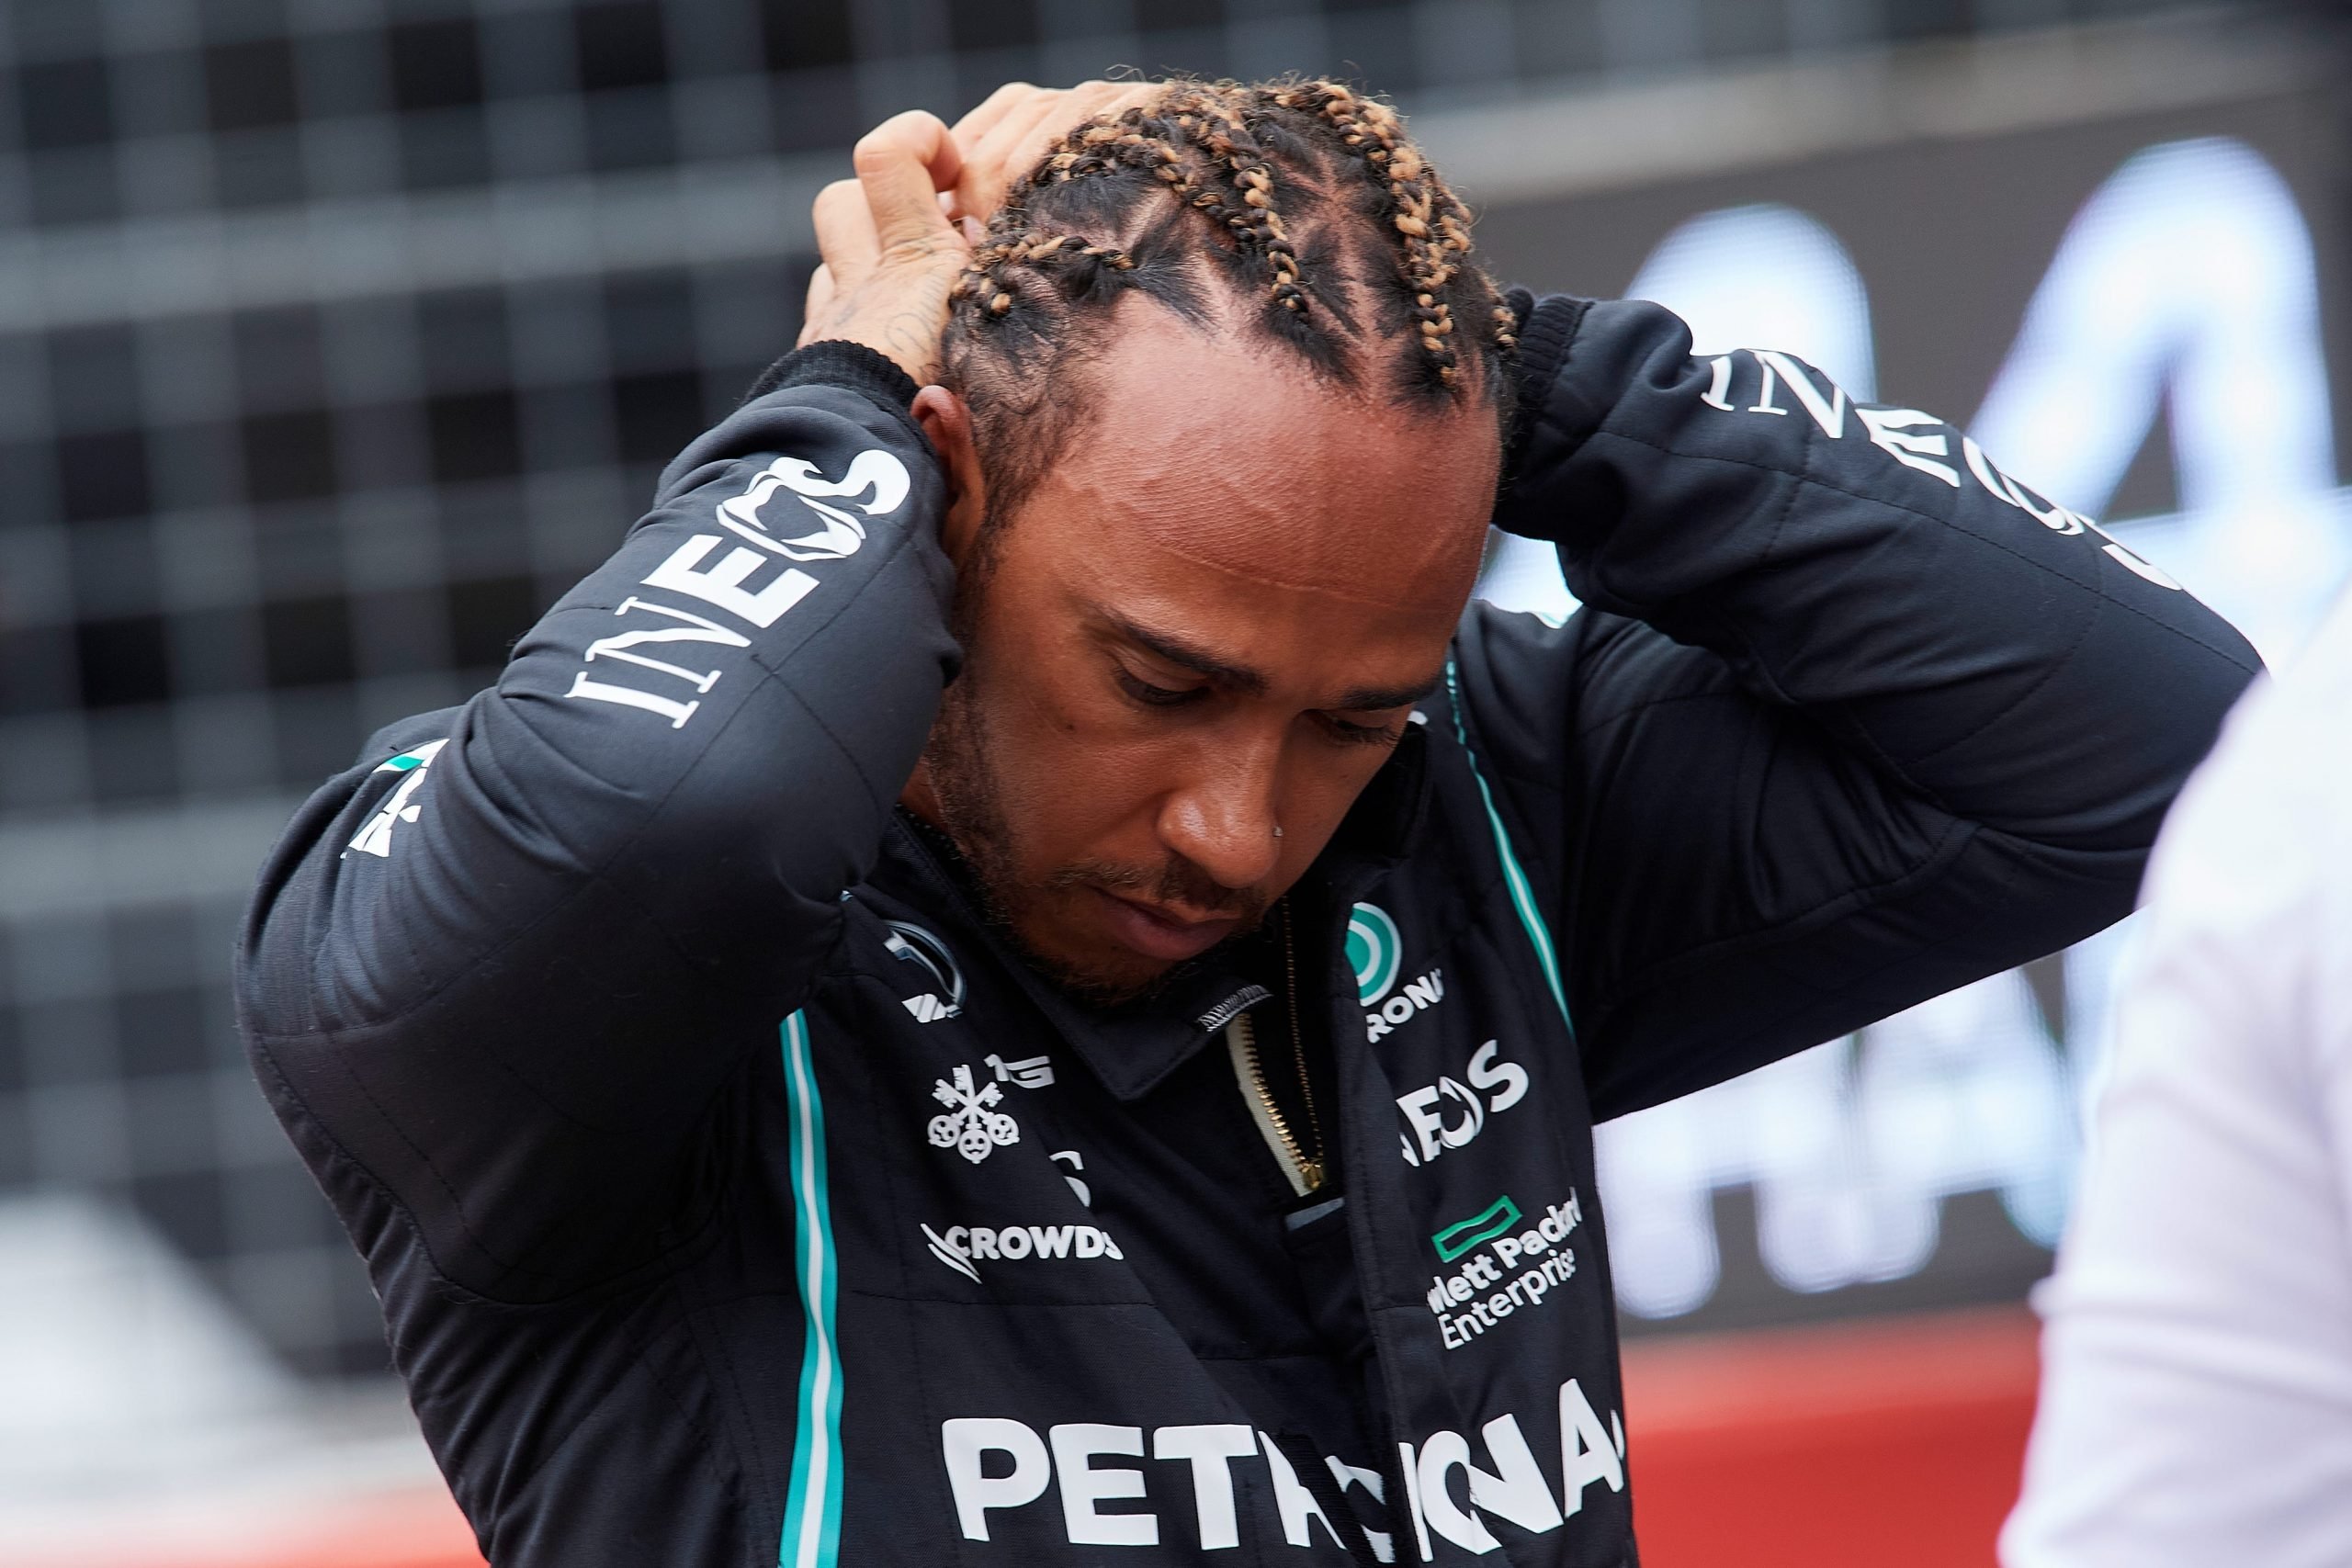 British Formula One driver Lewis Hamilton bows his head after a race